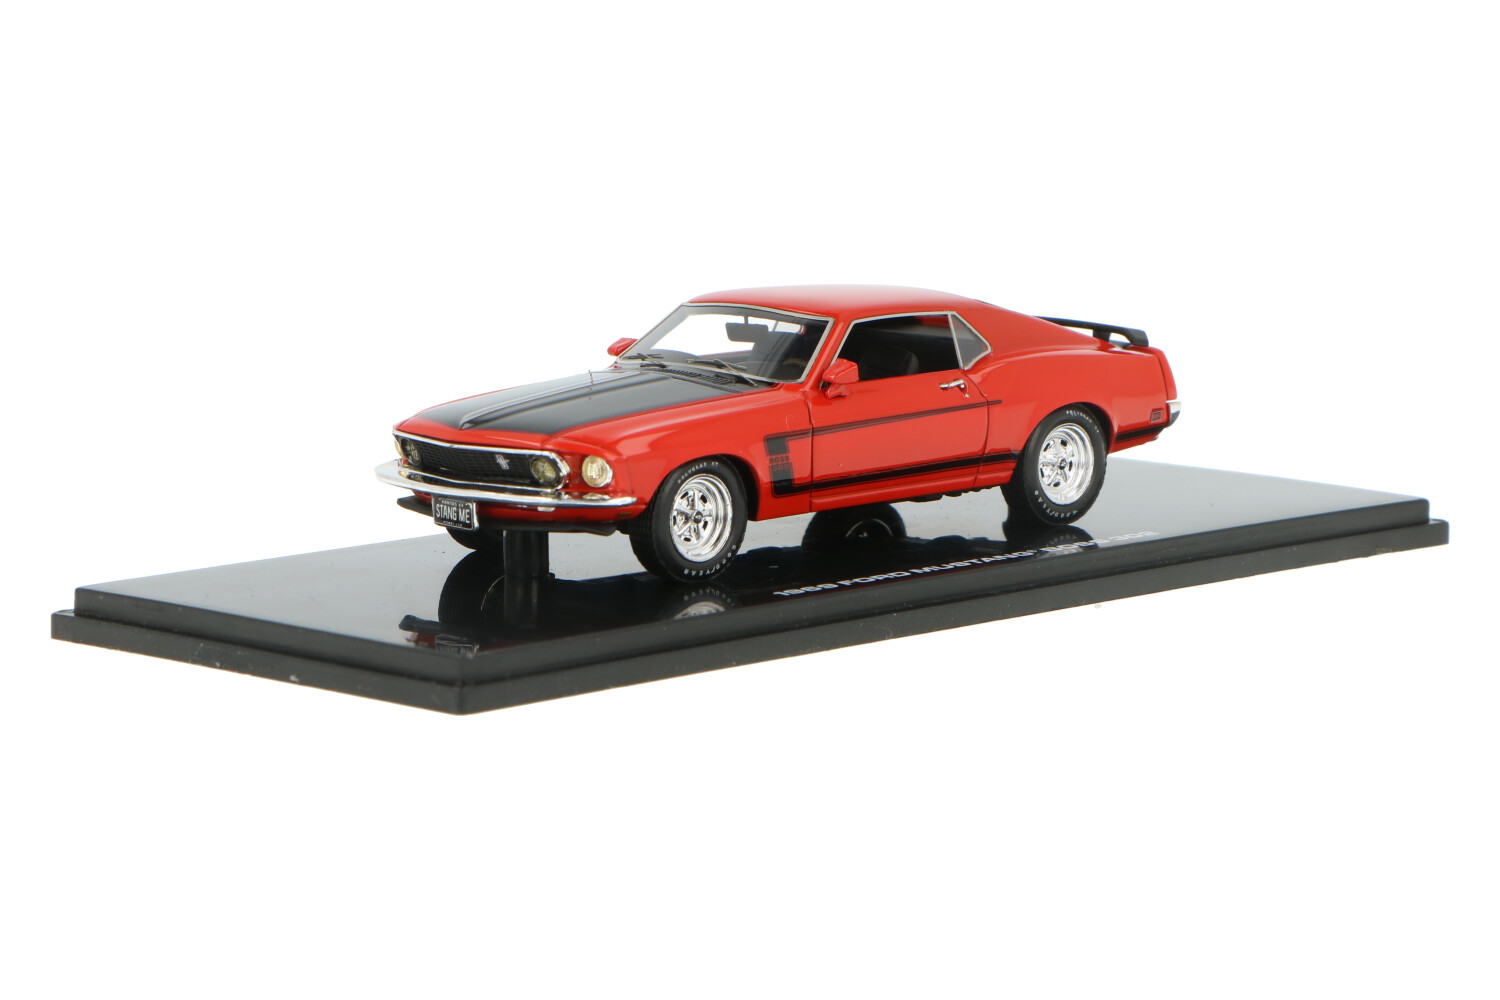 Ford-Mustang-804902430039_1315804902430039Ford-Mustang-804902430039_Houseofmodelcars_.jpg